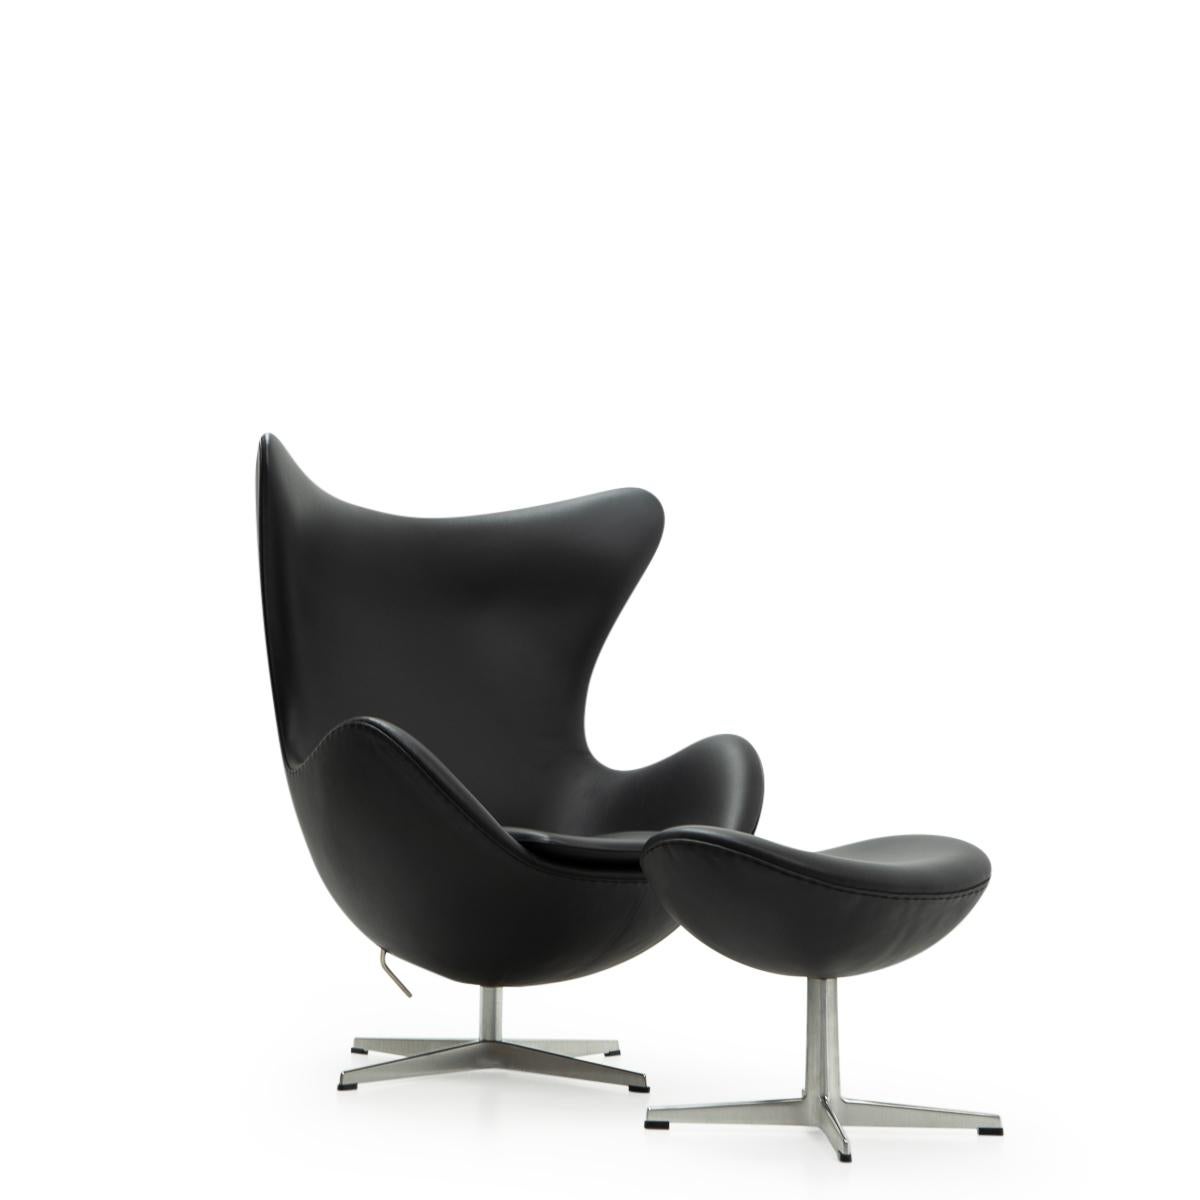 Egg Chair and ottoman in black leather by Arne Jacobsen for Fritz Hansen produced in 2016.

The Egg chair by Arne Jacobsen hardly needs an introduction, considering it is one of the mostly recognizable and sought after pieces of classic mid 20th